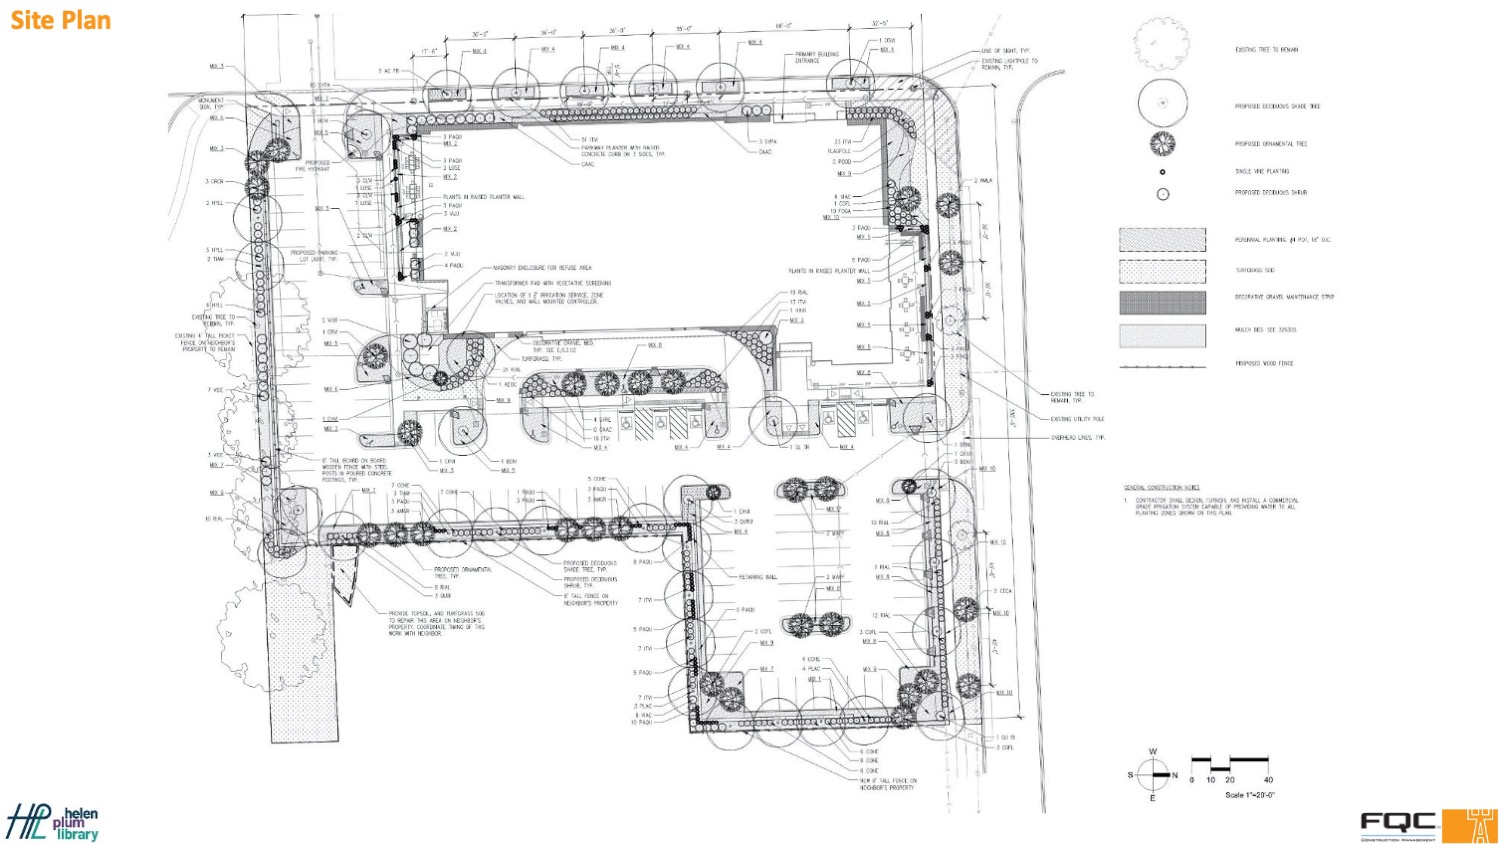 411 Main Street Site Plan with Landscaping Notes